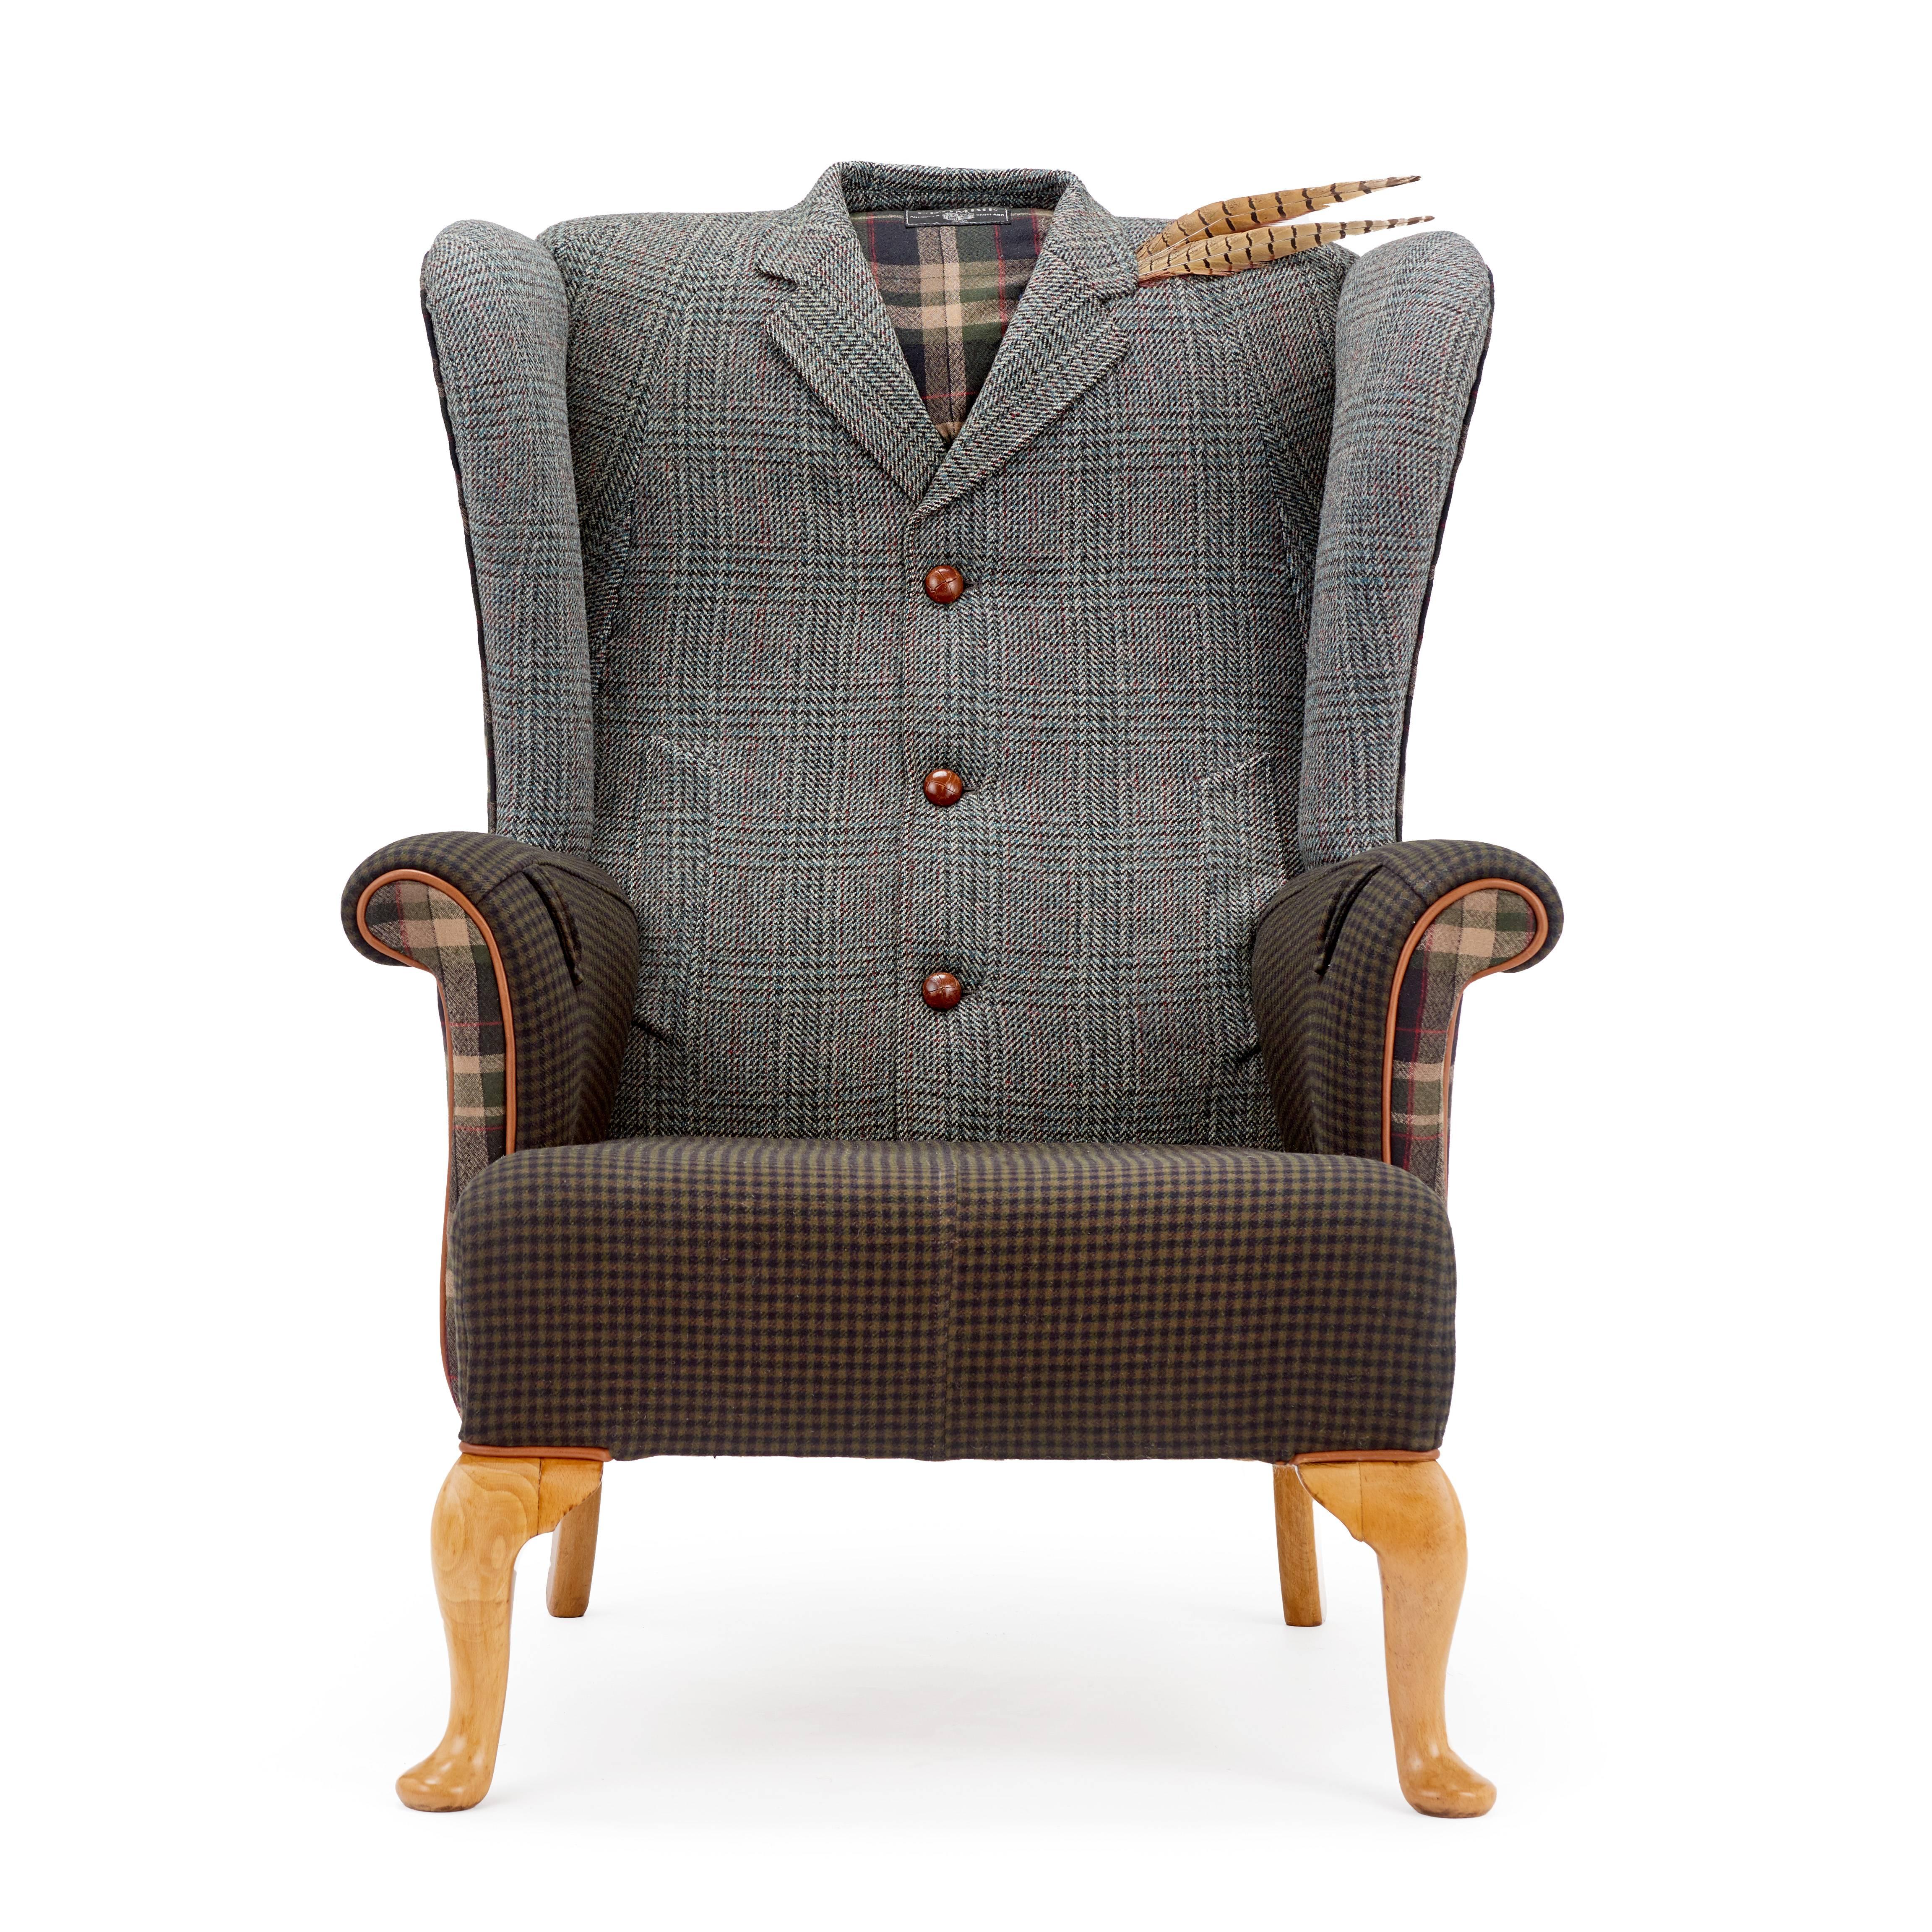 The original 1970s retro beechwood wing chair with a difference.

Reupholstered in a traditional eclectic mix of original Crombie mens overcoat with a contrasting cocktail of other tweeds and tartans.

Pockets to both sides of chair, original